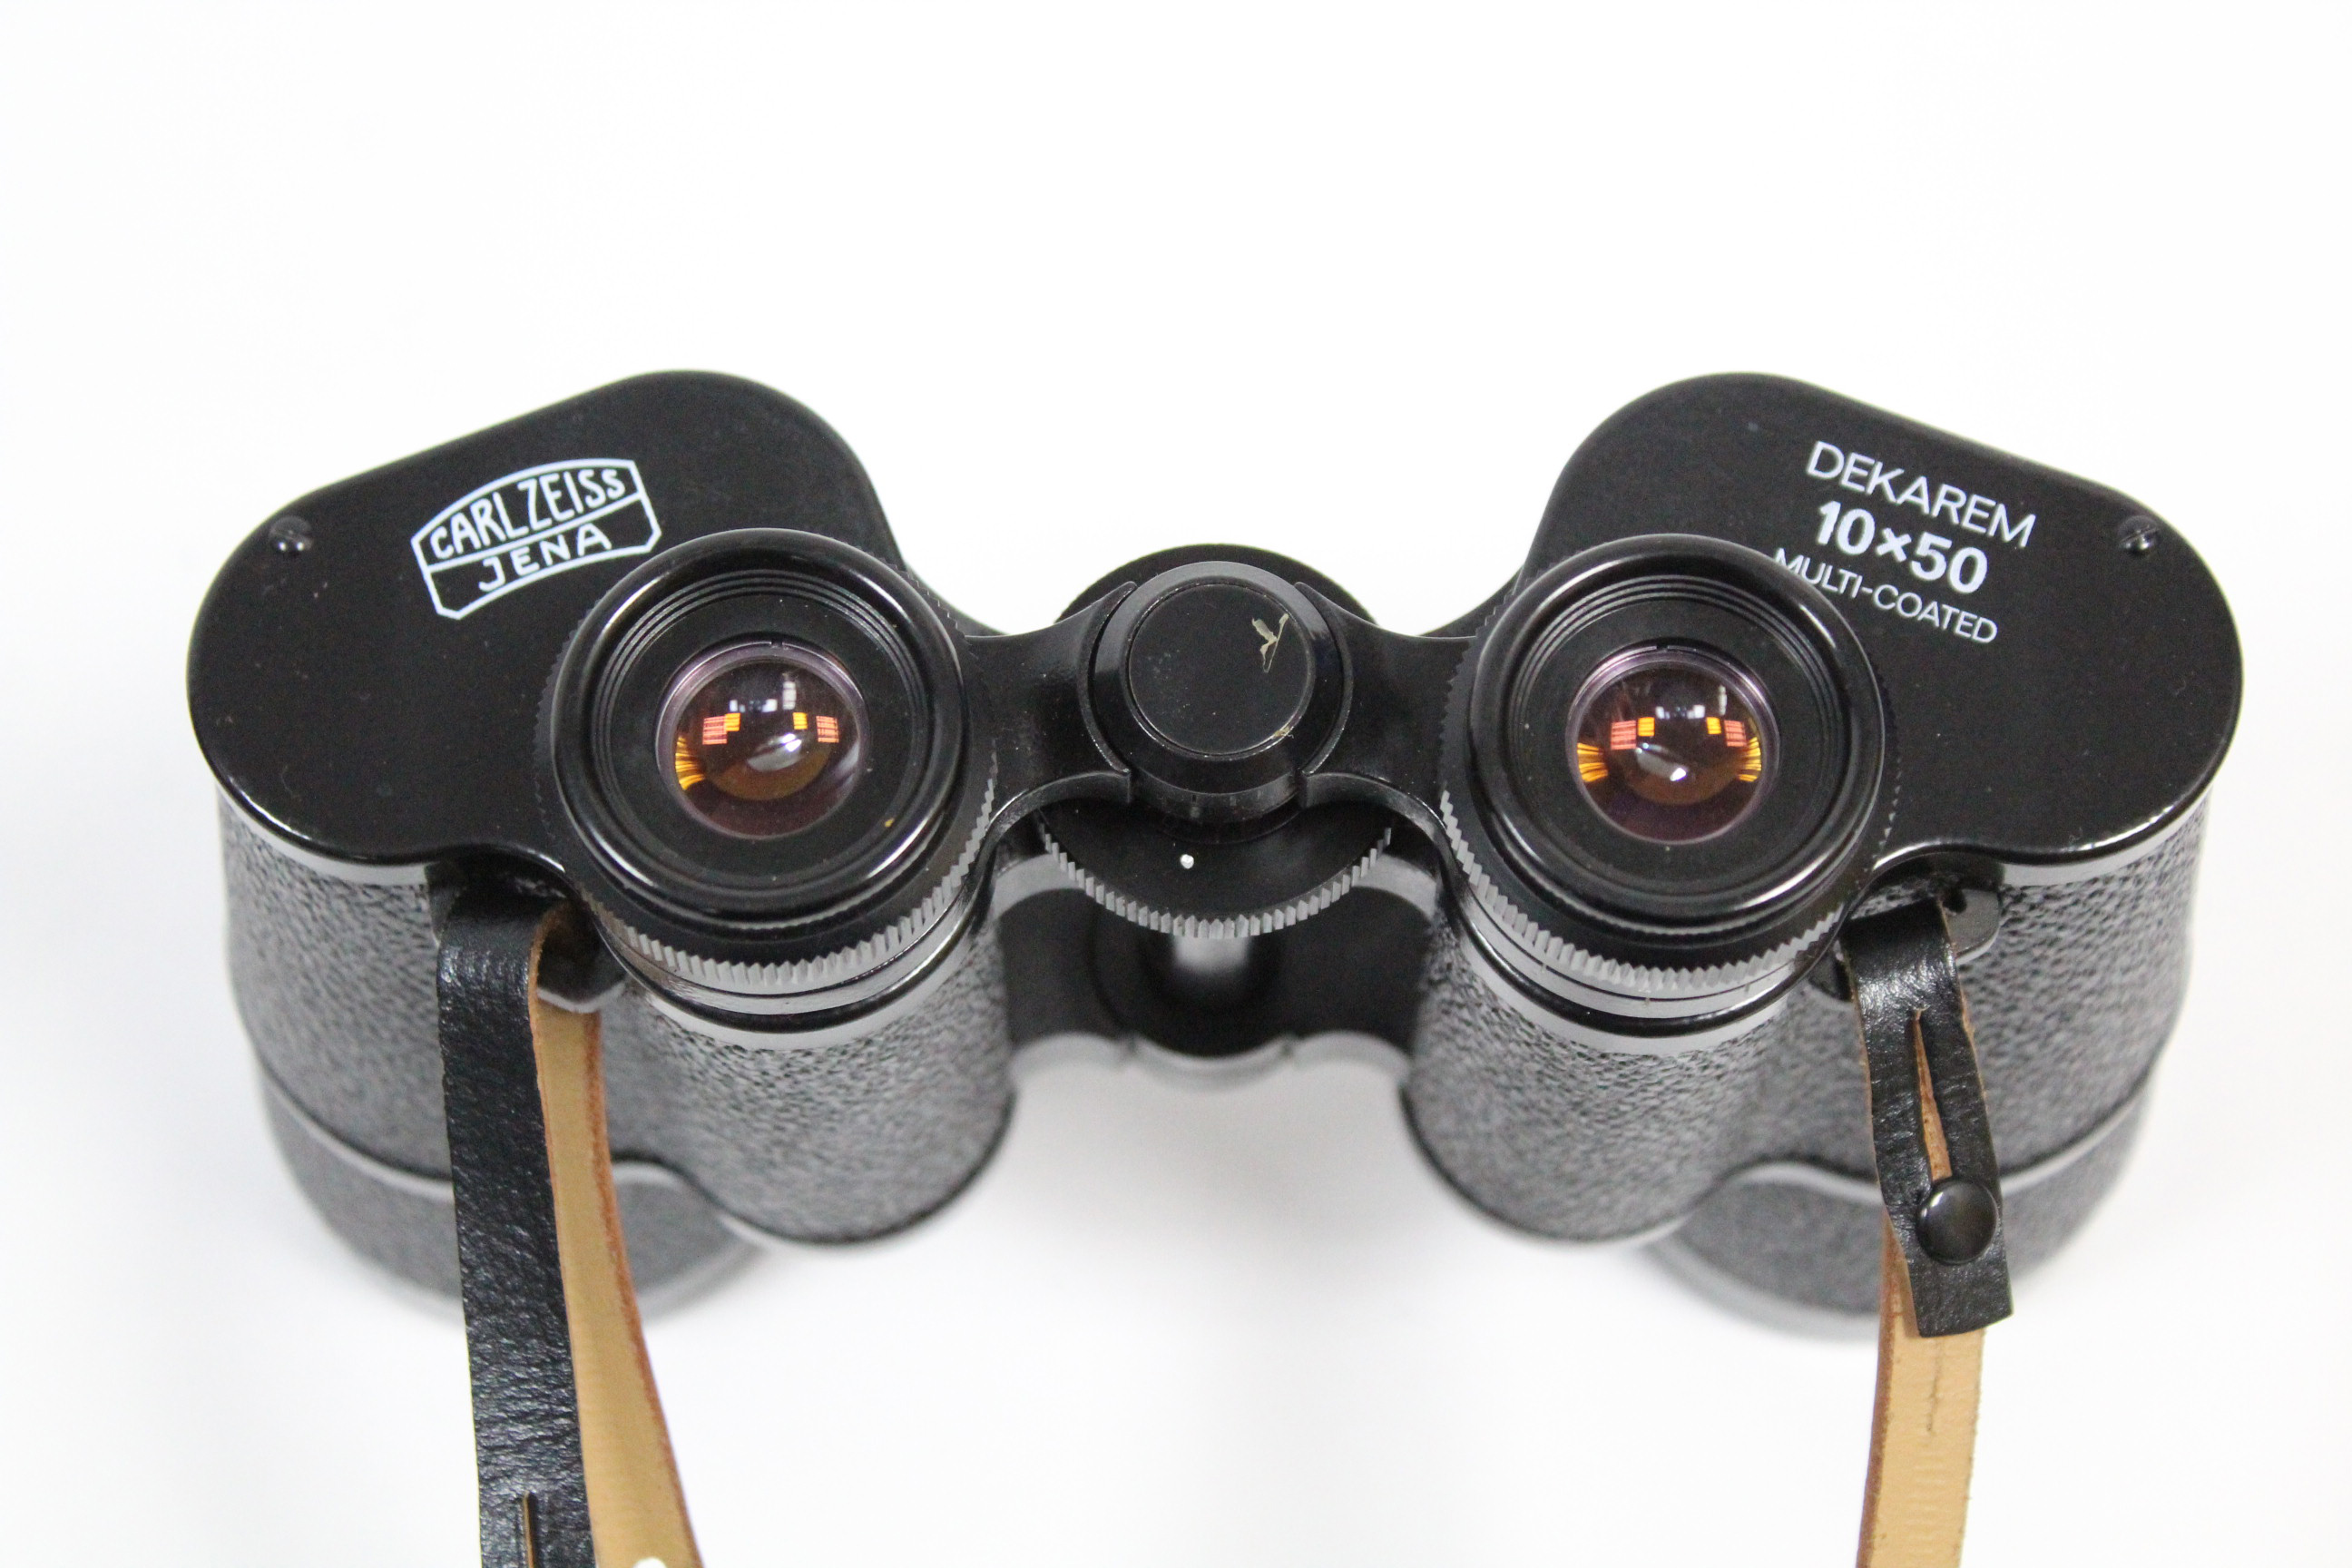 A pair of Carl Zeiss Jena Dekarem 10 x 50mm binoculars with leather case. - Image 2 of 2